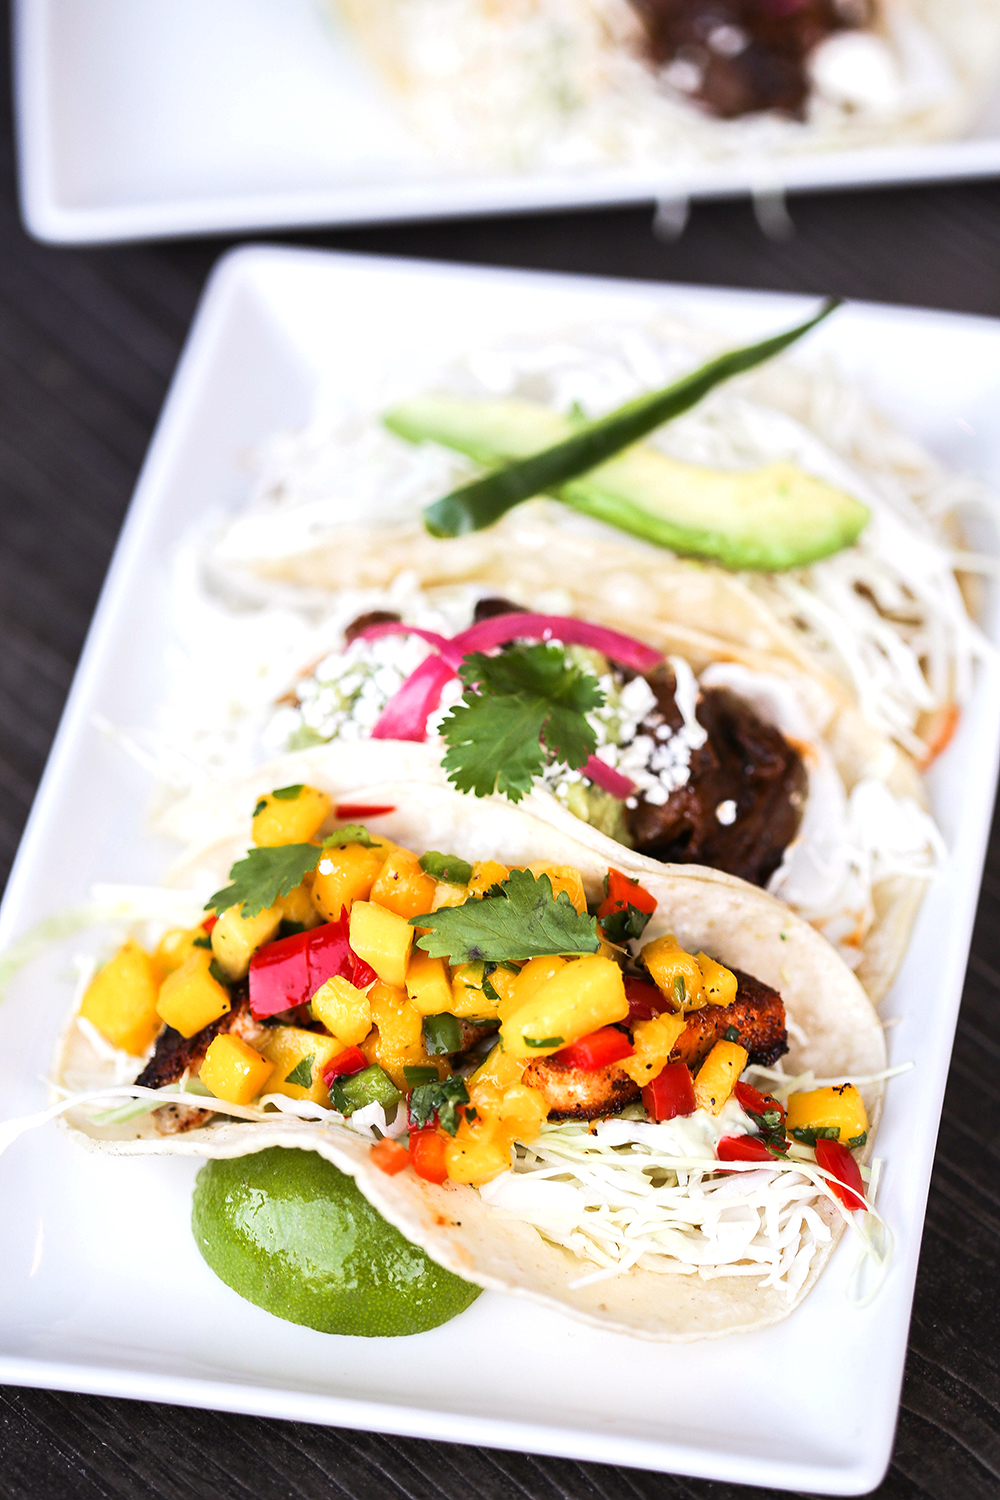 The "Taco Bar!" section of the menu includes chicken, beef cheek, seasonal Pacific white fish tacos.